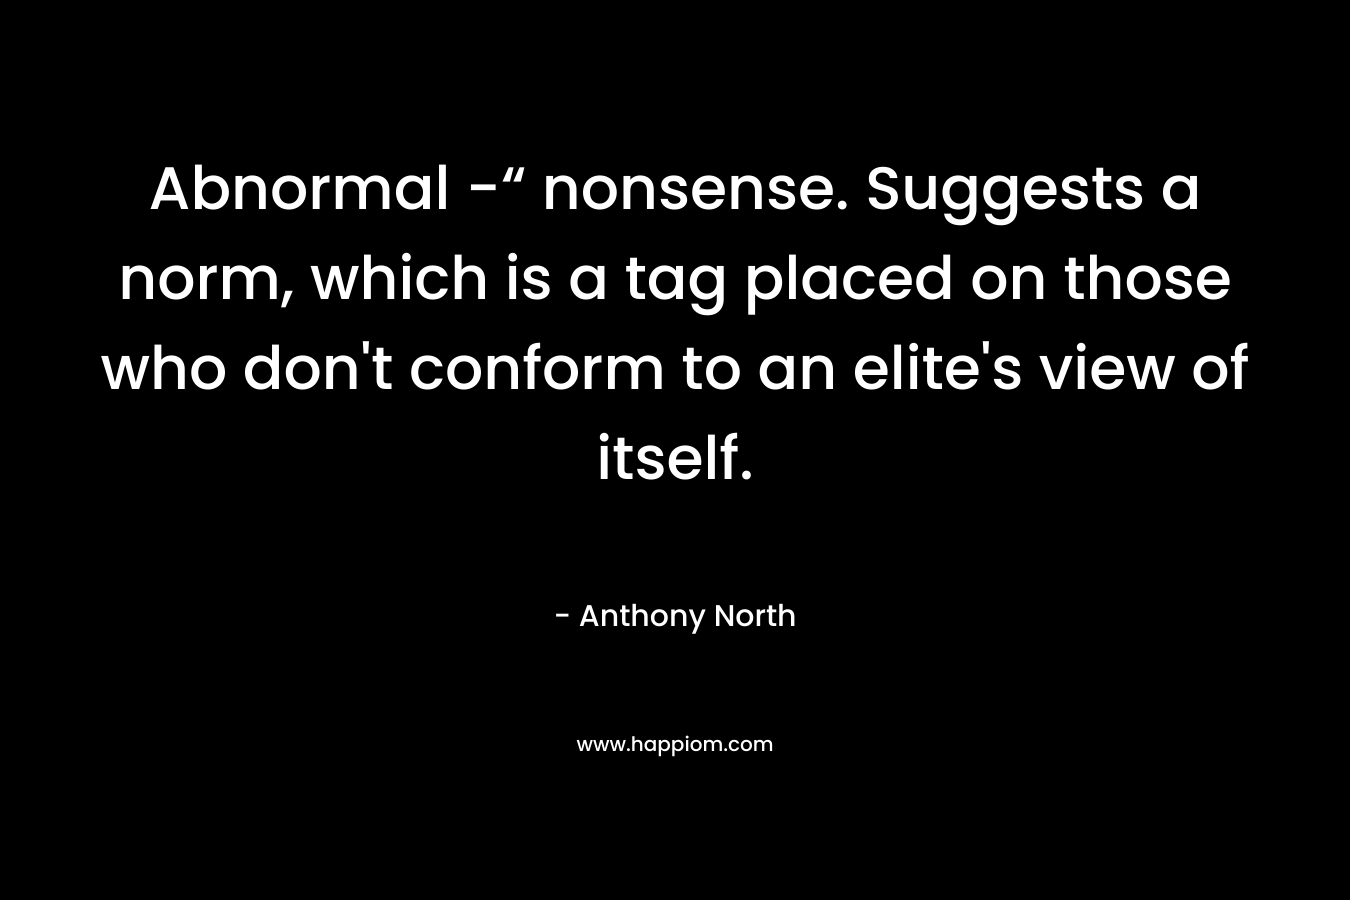 Abnormal -“ nonsense. Suggests a norm, which is a tag placed on those who don't conform to an elite's view of itself.